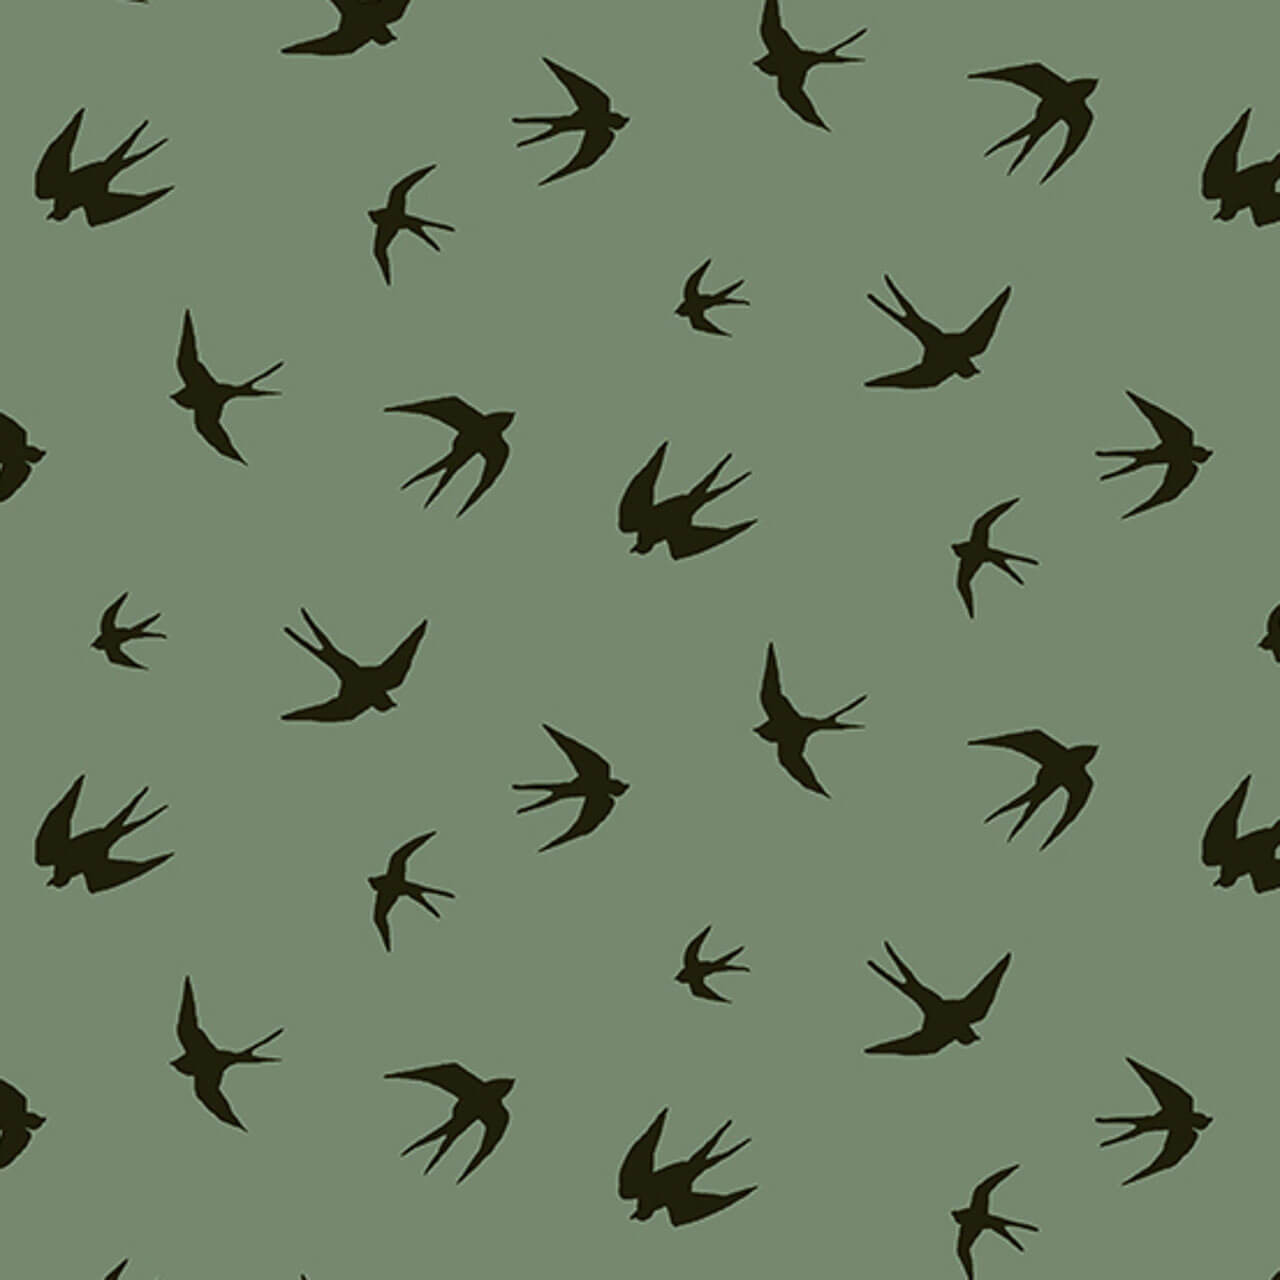 Green and black bird pattern 'Beaches in Patina' fabric from the Verdigris collection by Libs Elliott for Andover Fabrics.